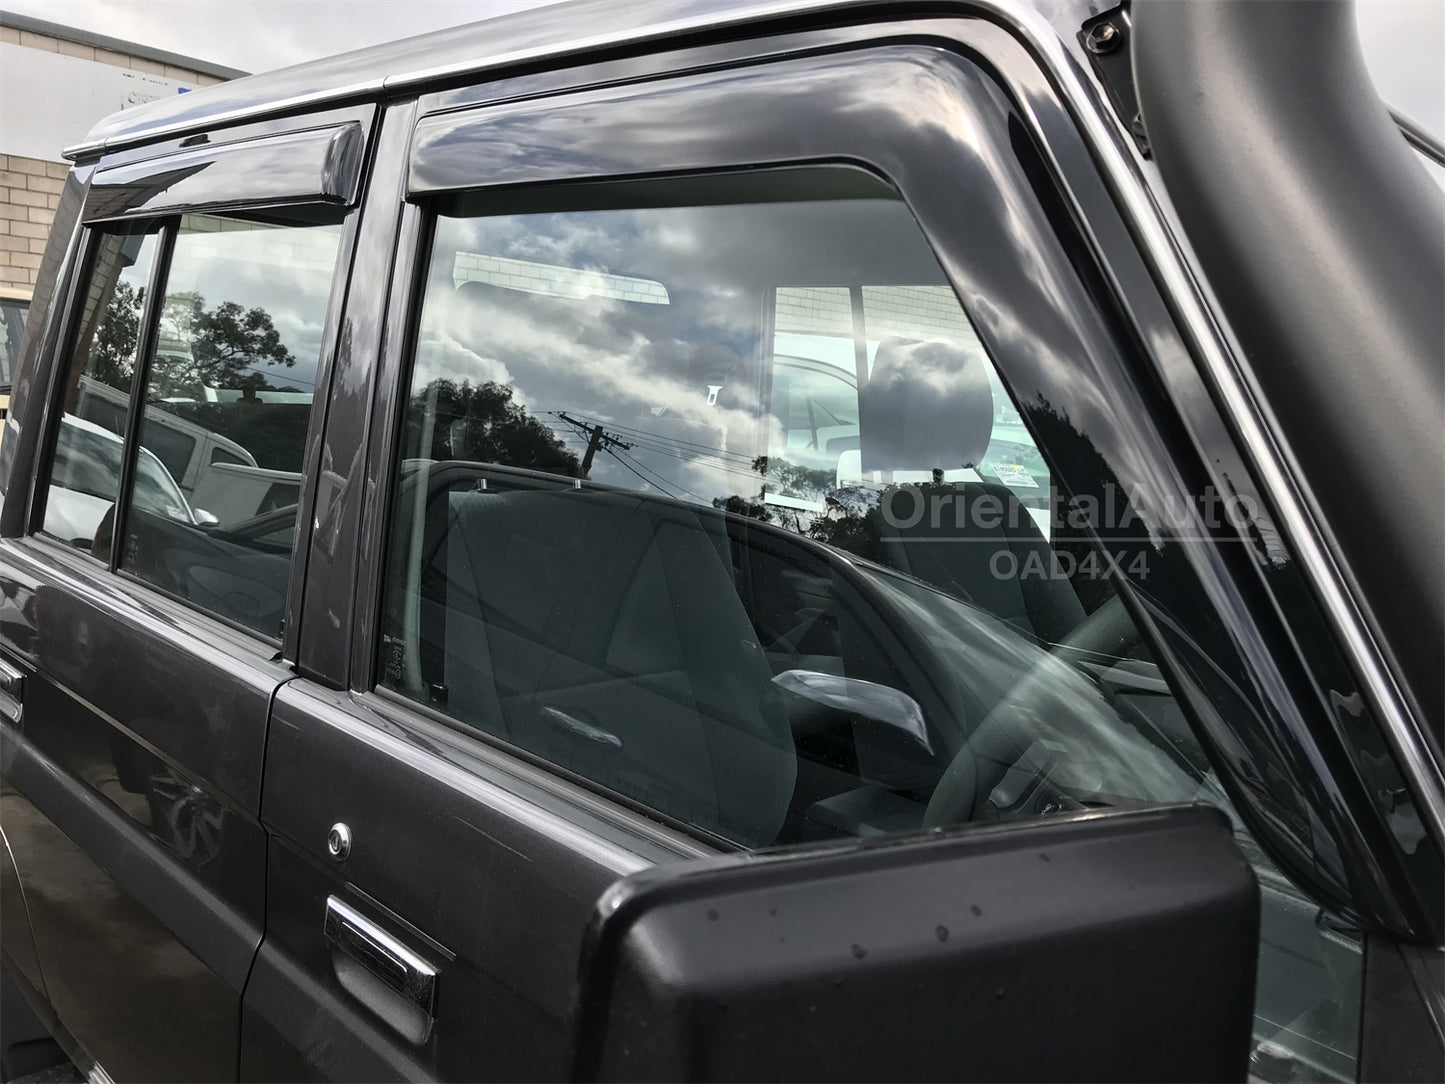 Luxury Weather Shields & 3D Dash Mat for Toyota Landcruiser Land Cruiser 70 76 79 2009-2023 Weathershields Window Visors + Dashboard Cover for LC70 LC76 LC79